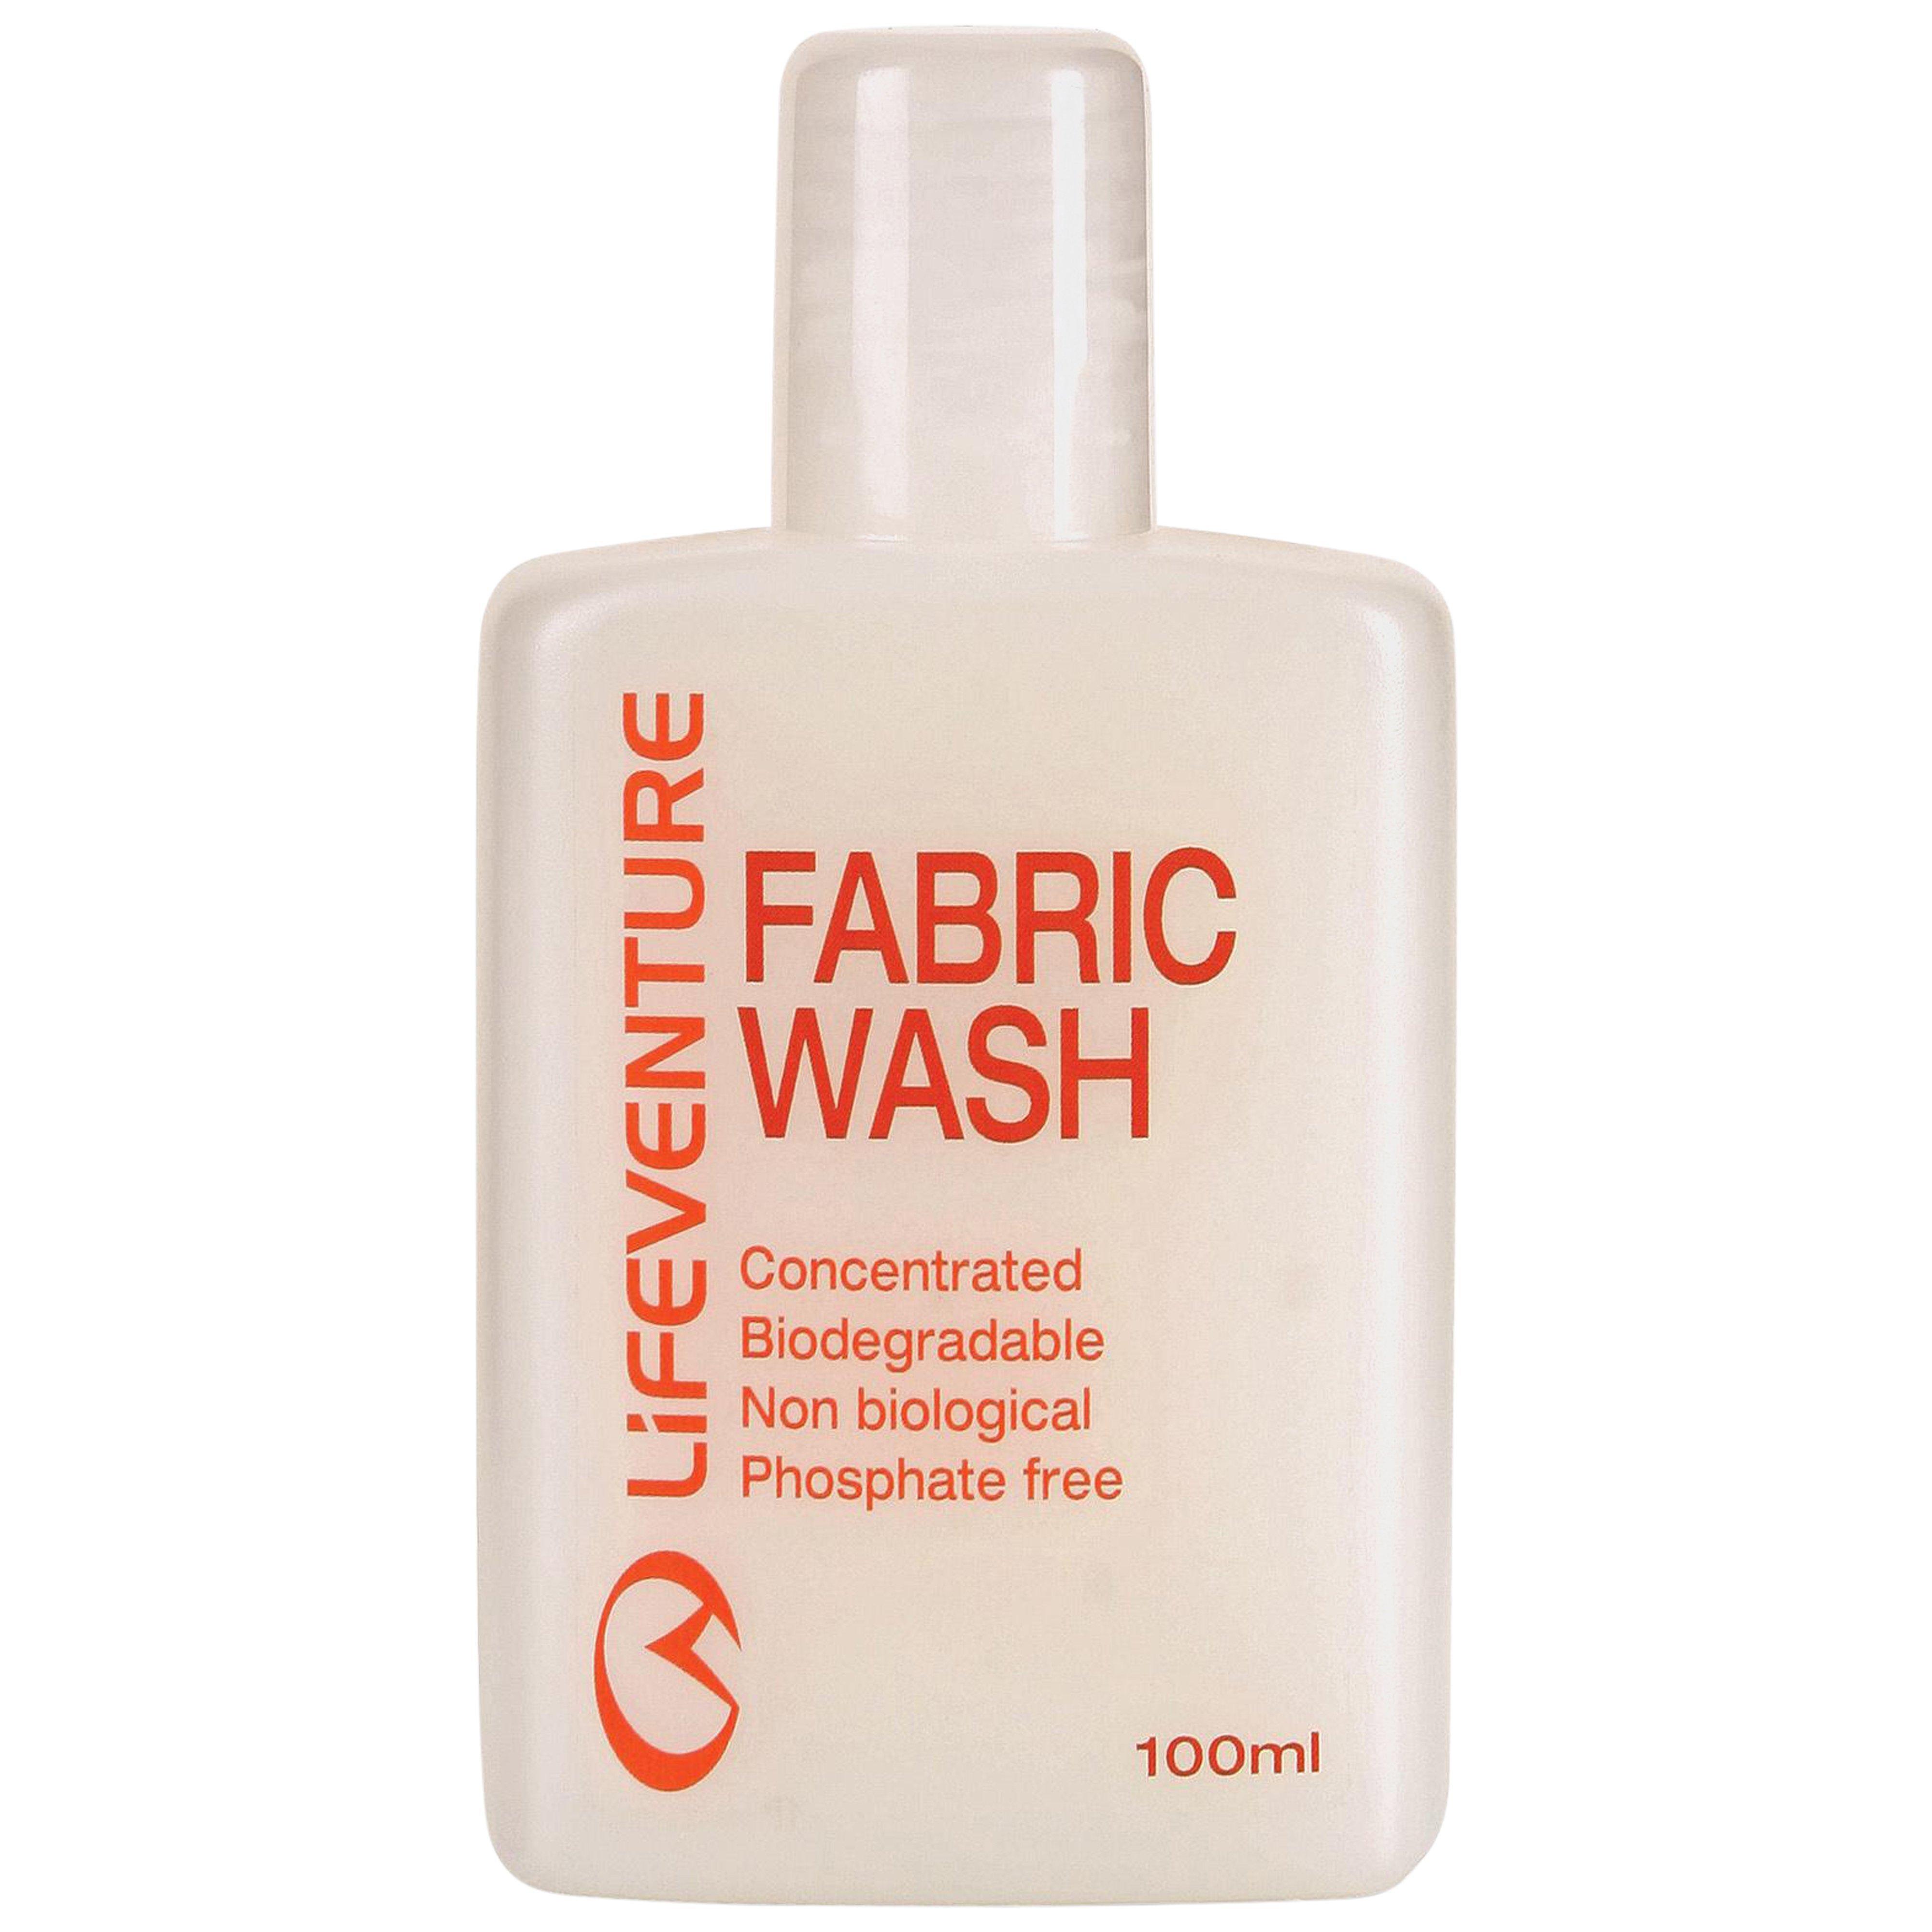 Lifeventure Fabric Wash (100ml) Review